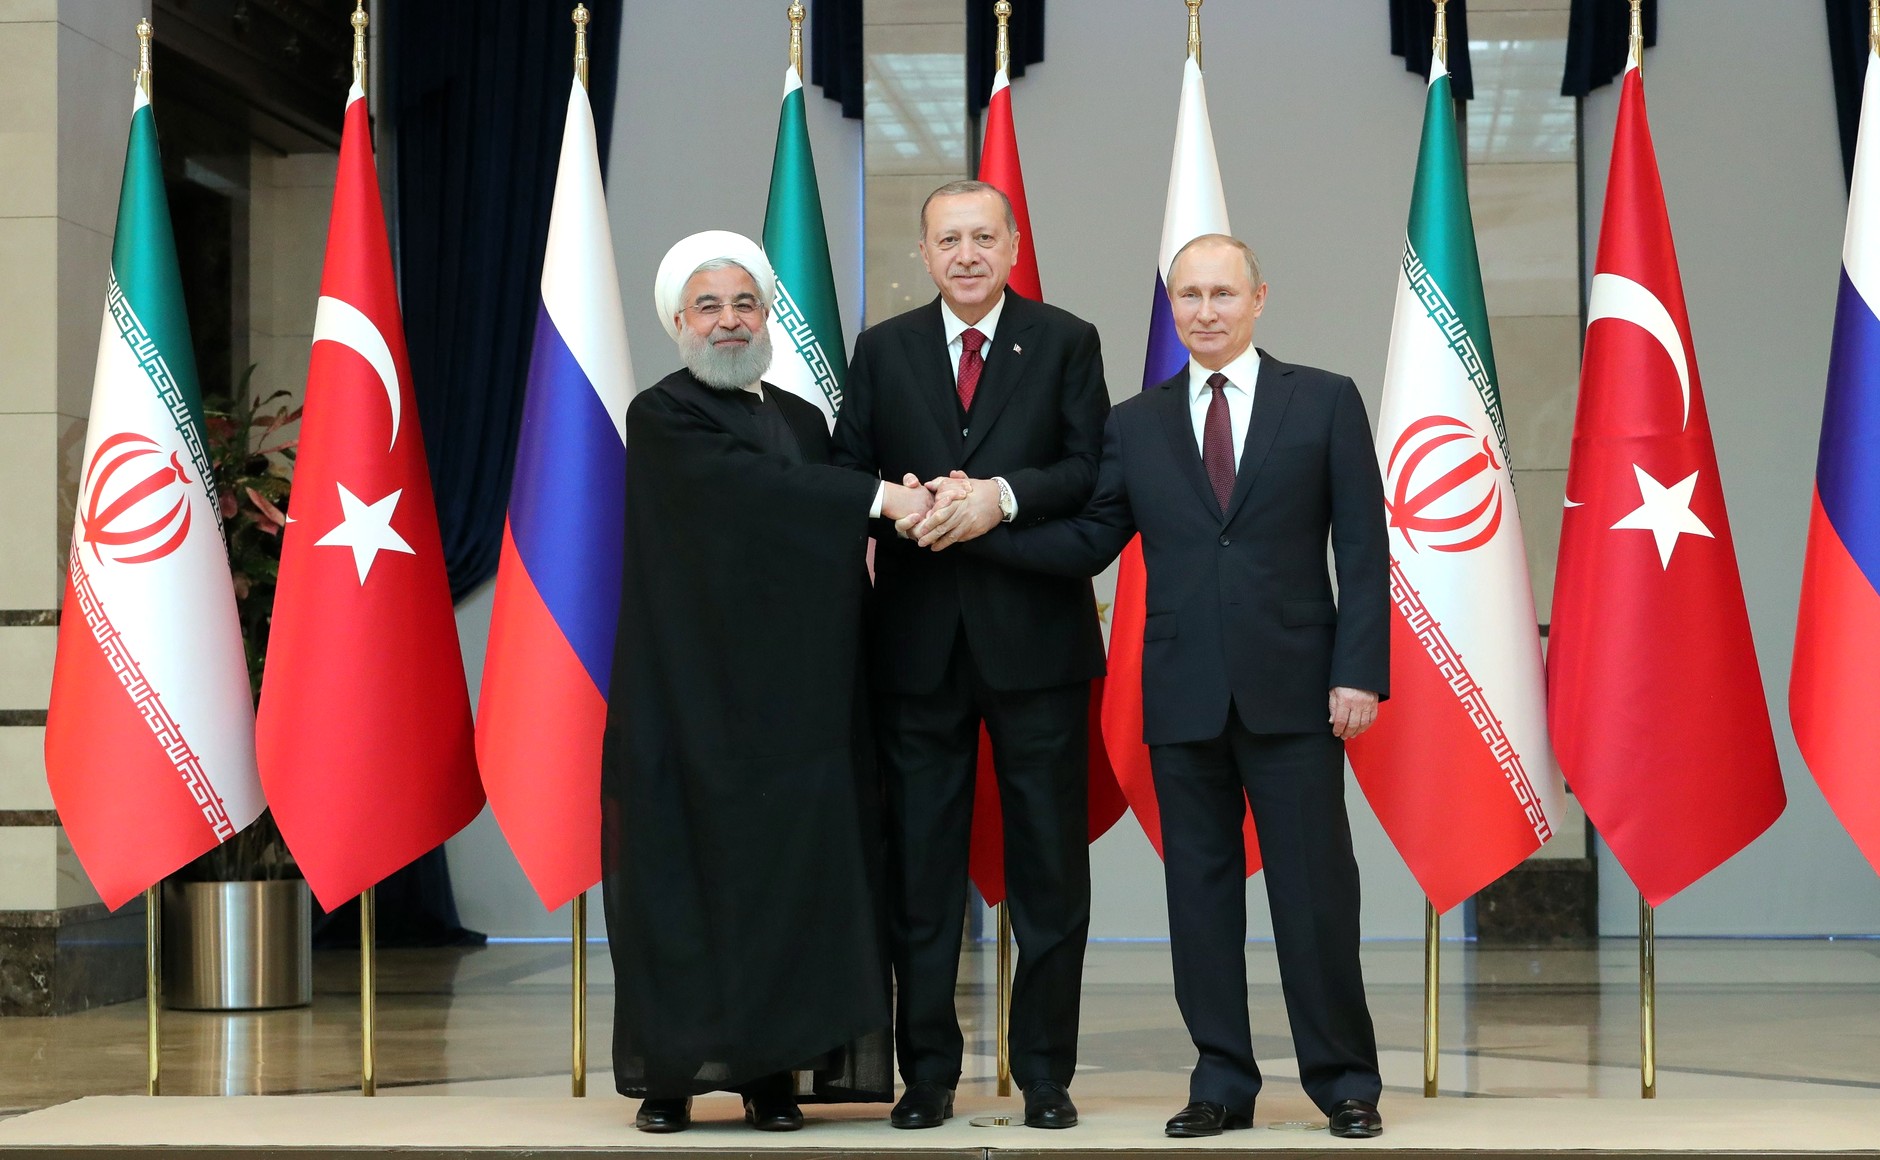 Russian President Vladimir Putin With President of Iran Hassan Rouhani (left) and President of Turkey Recep Tayyip Erdogan before the trilateral meeting in Ankara, Turkey April 3-4, 2018